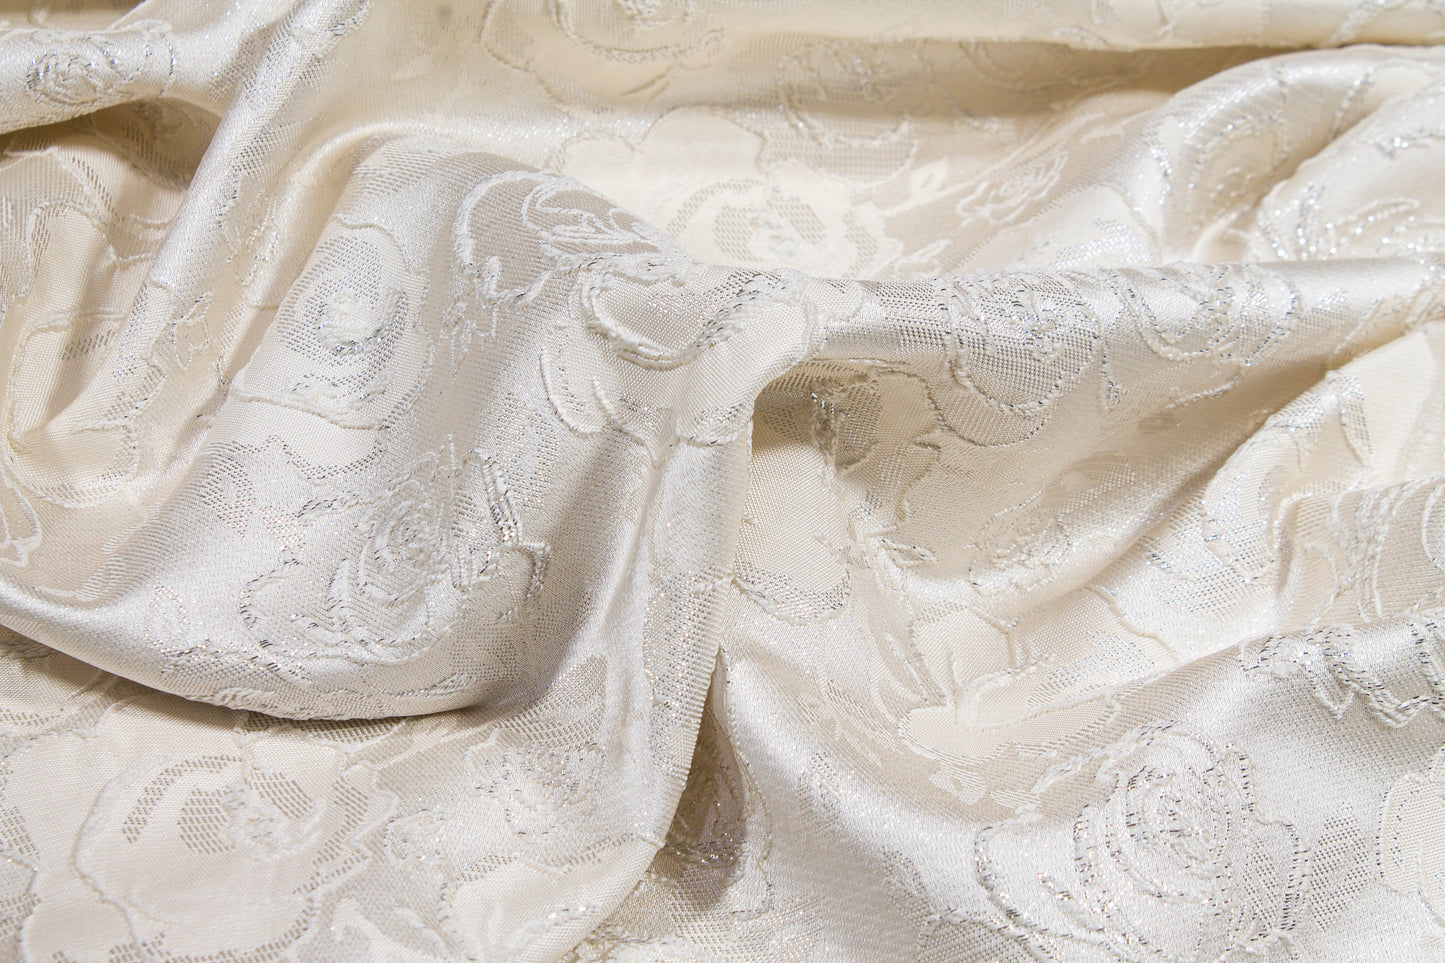 Metallic Rose Brocade - Ivory and Silver